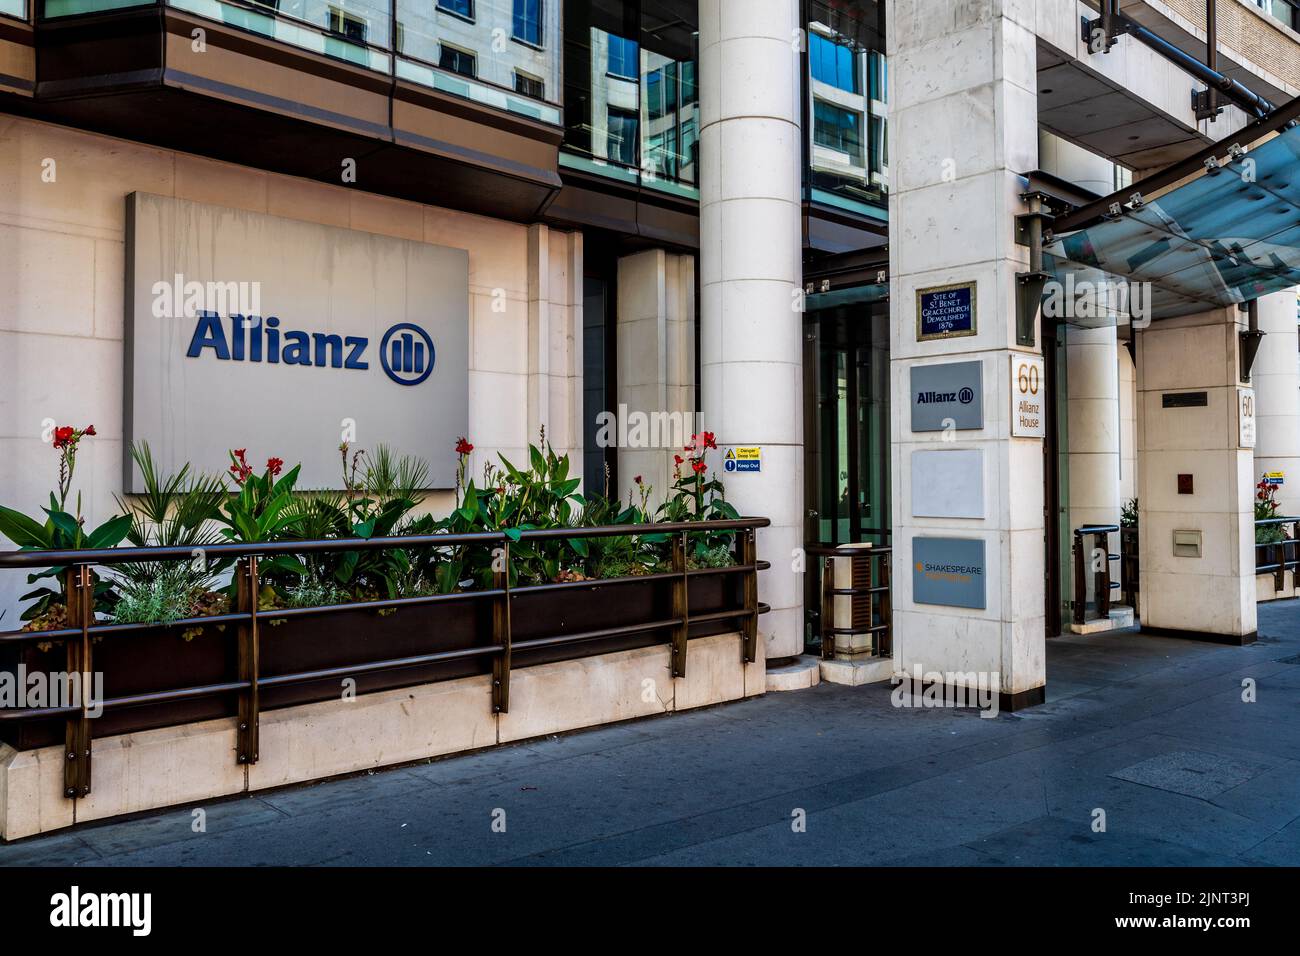 Allianz Insurance London Offices at 60 Gracechurch Street in the City of London Financial District. Allianz Global Corporate & Specialty London. Stock Photo